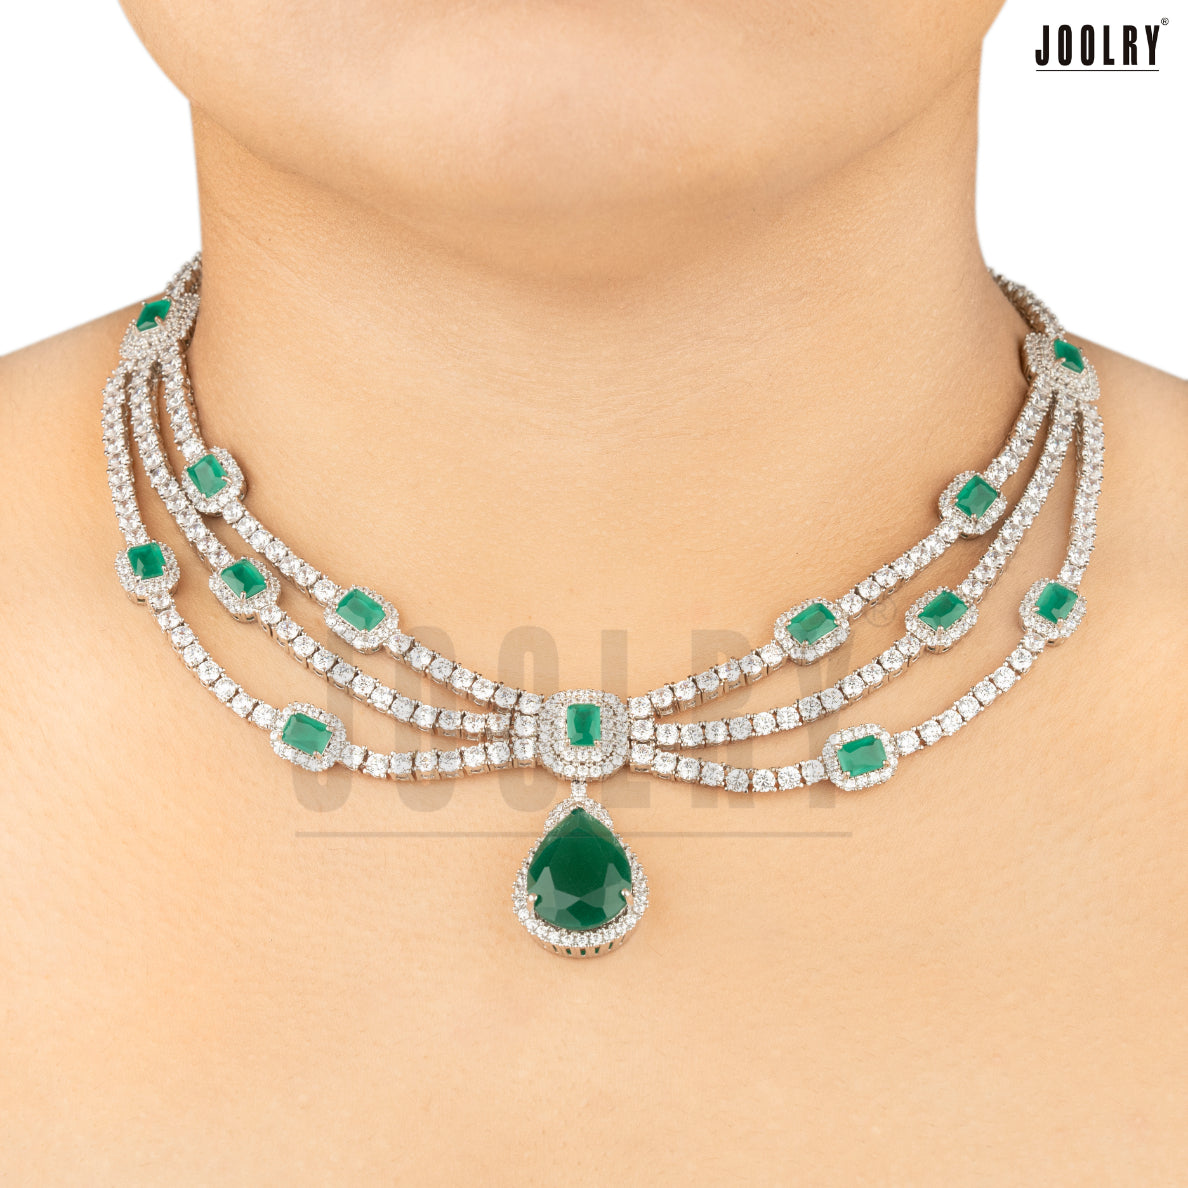 The queens necklace set